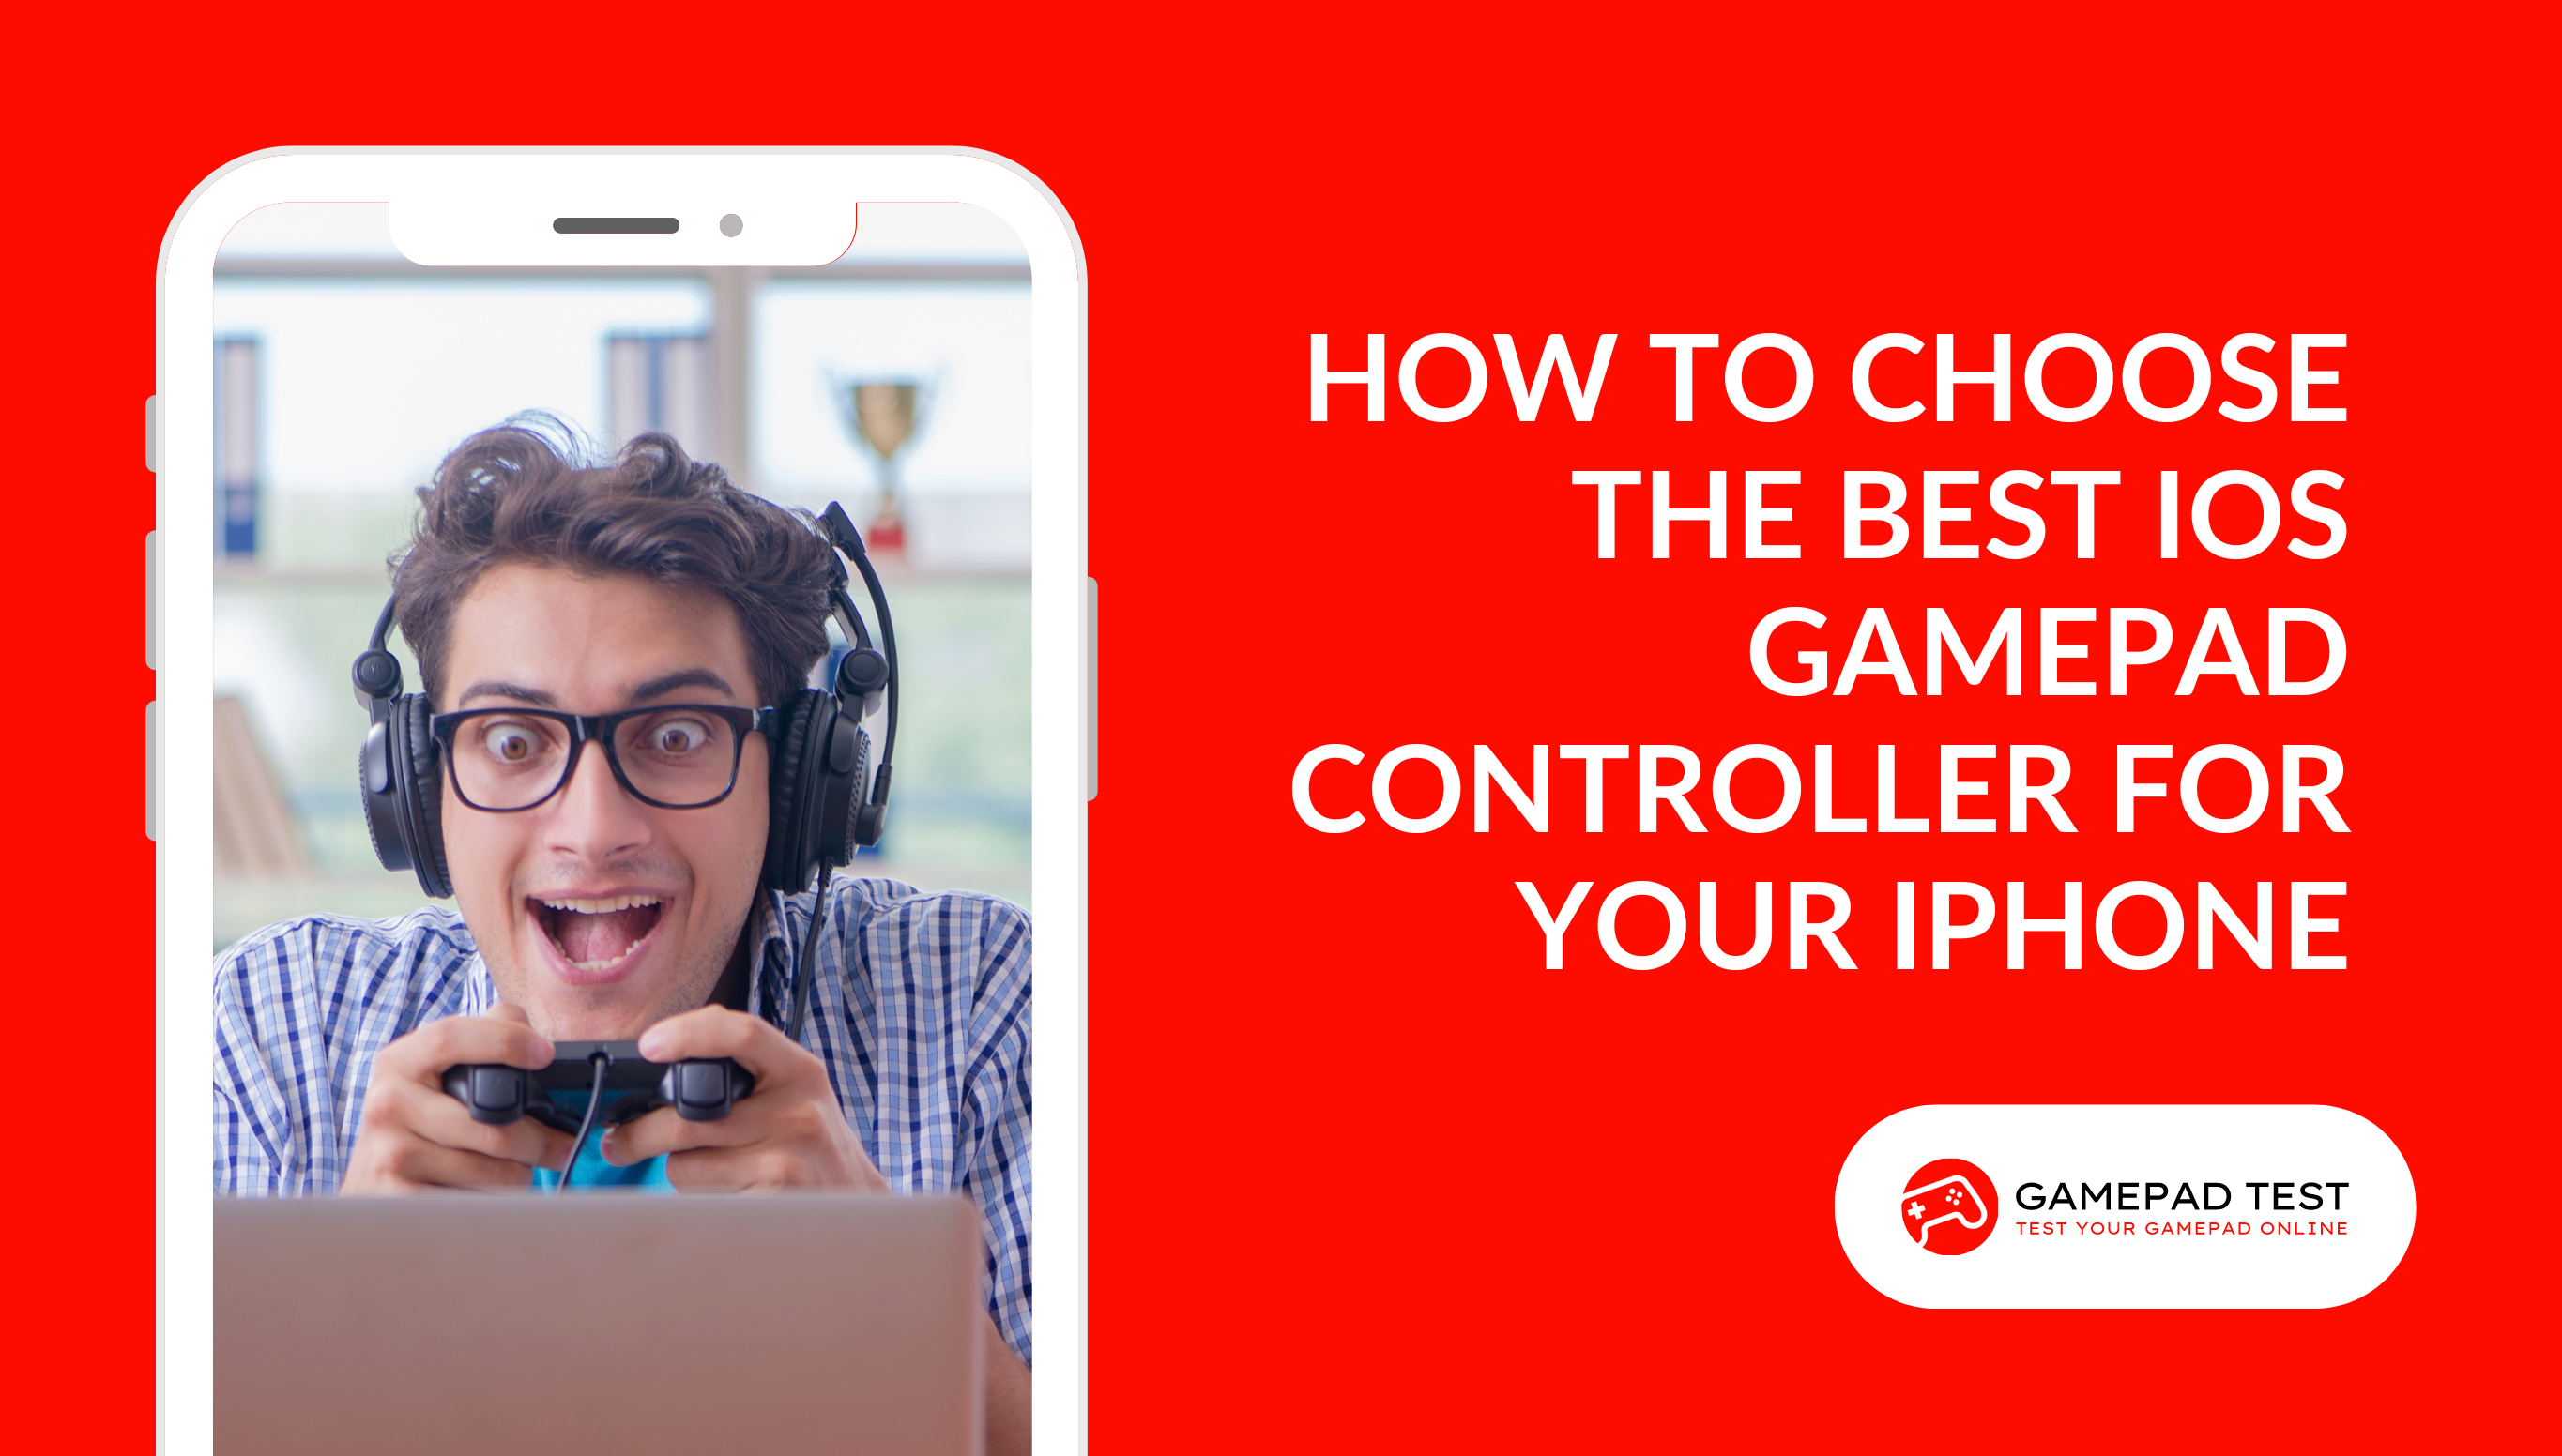 How to Choose the Best iOS Gamepad Controller for Your iPhone